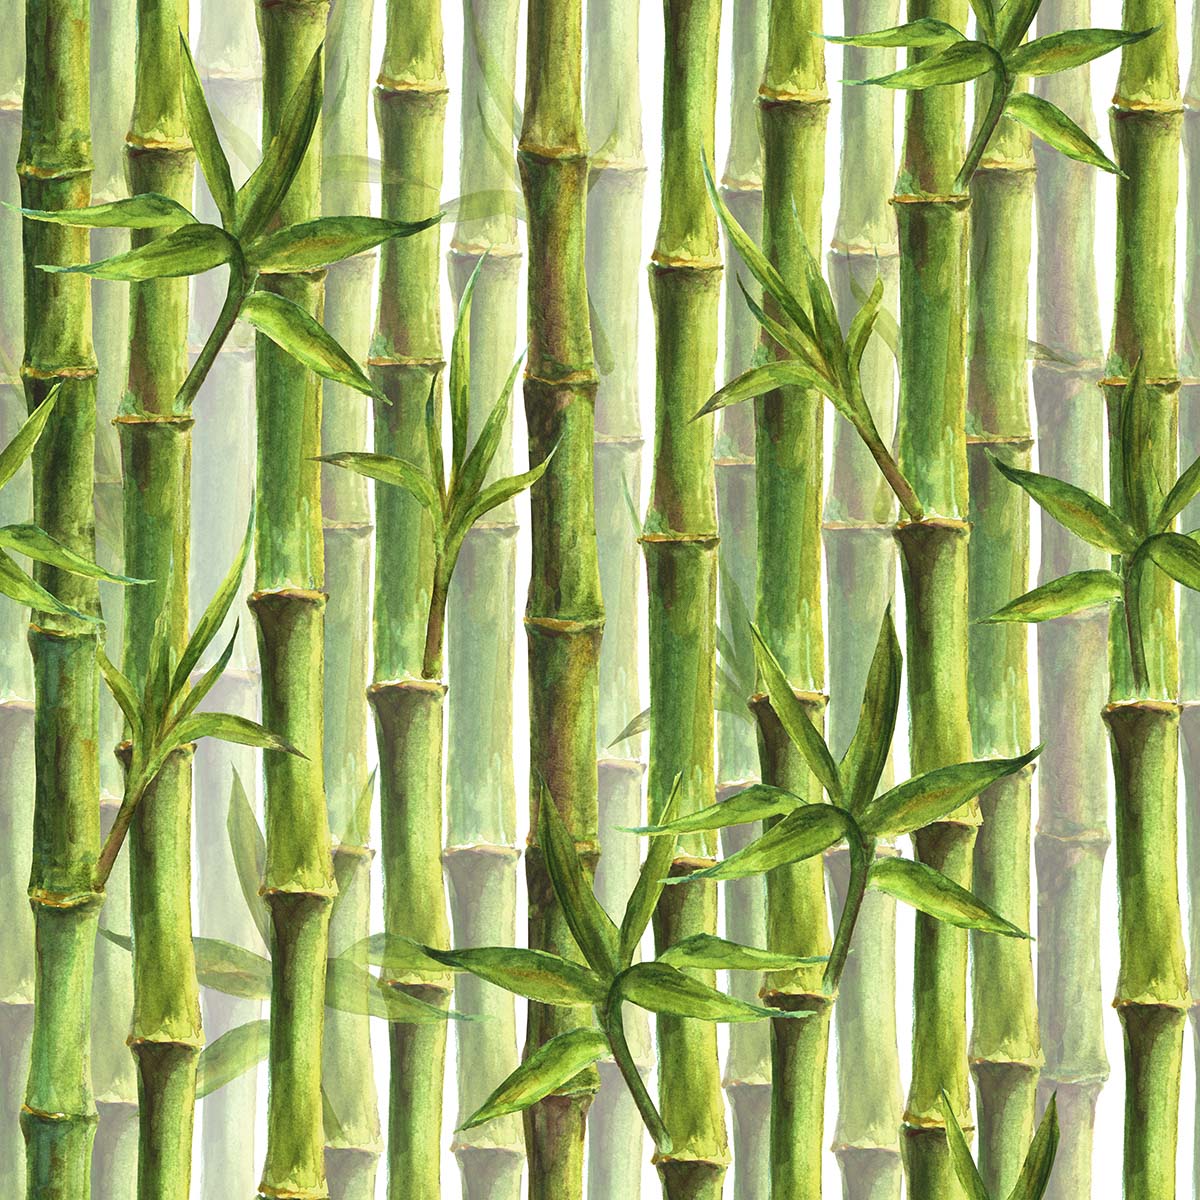 A group of bamboo stems with leaves